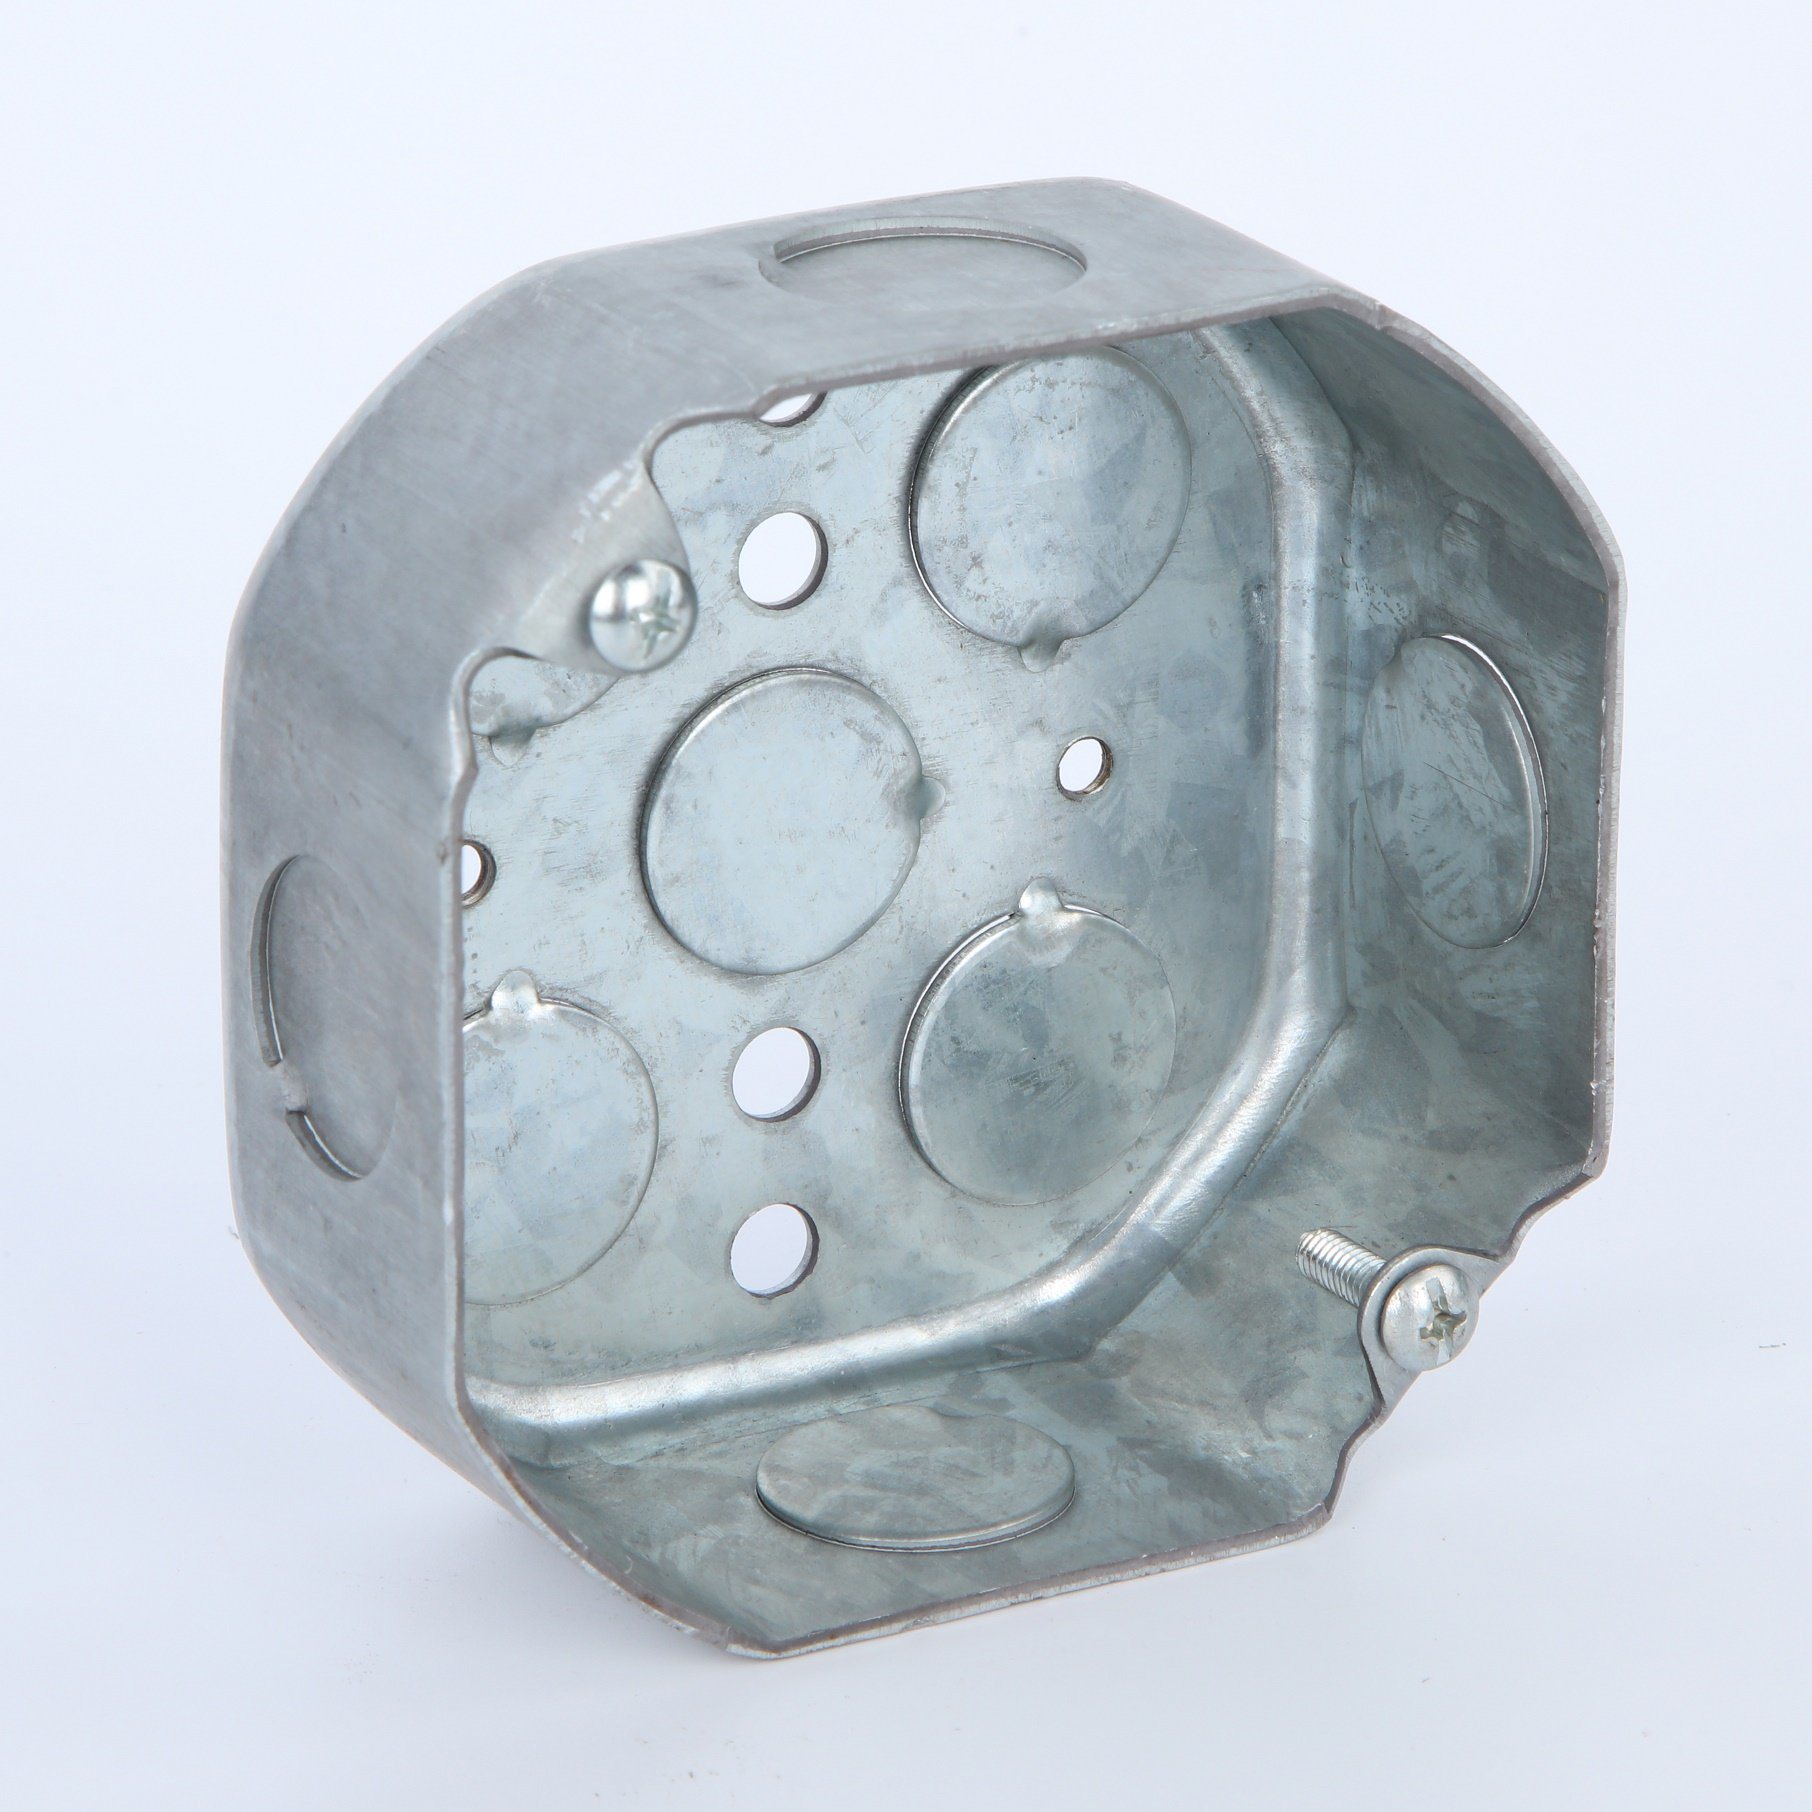 4 Square1/2 Inch Raised Duplex Receptacle Industrial Surface Cover